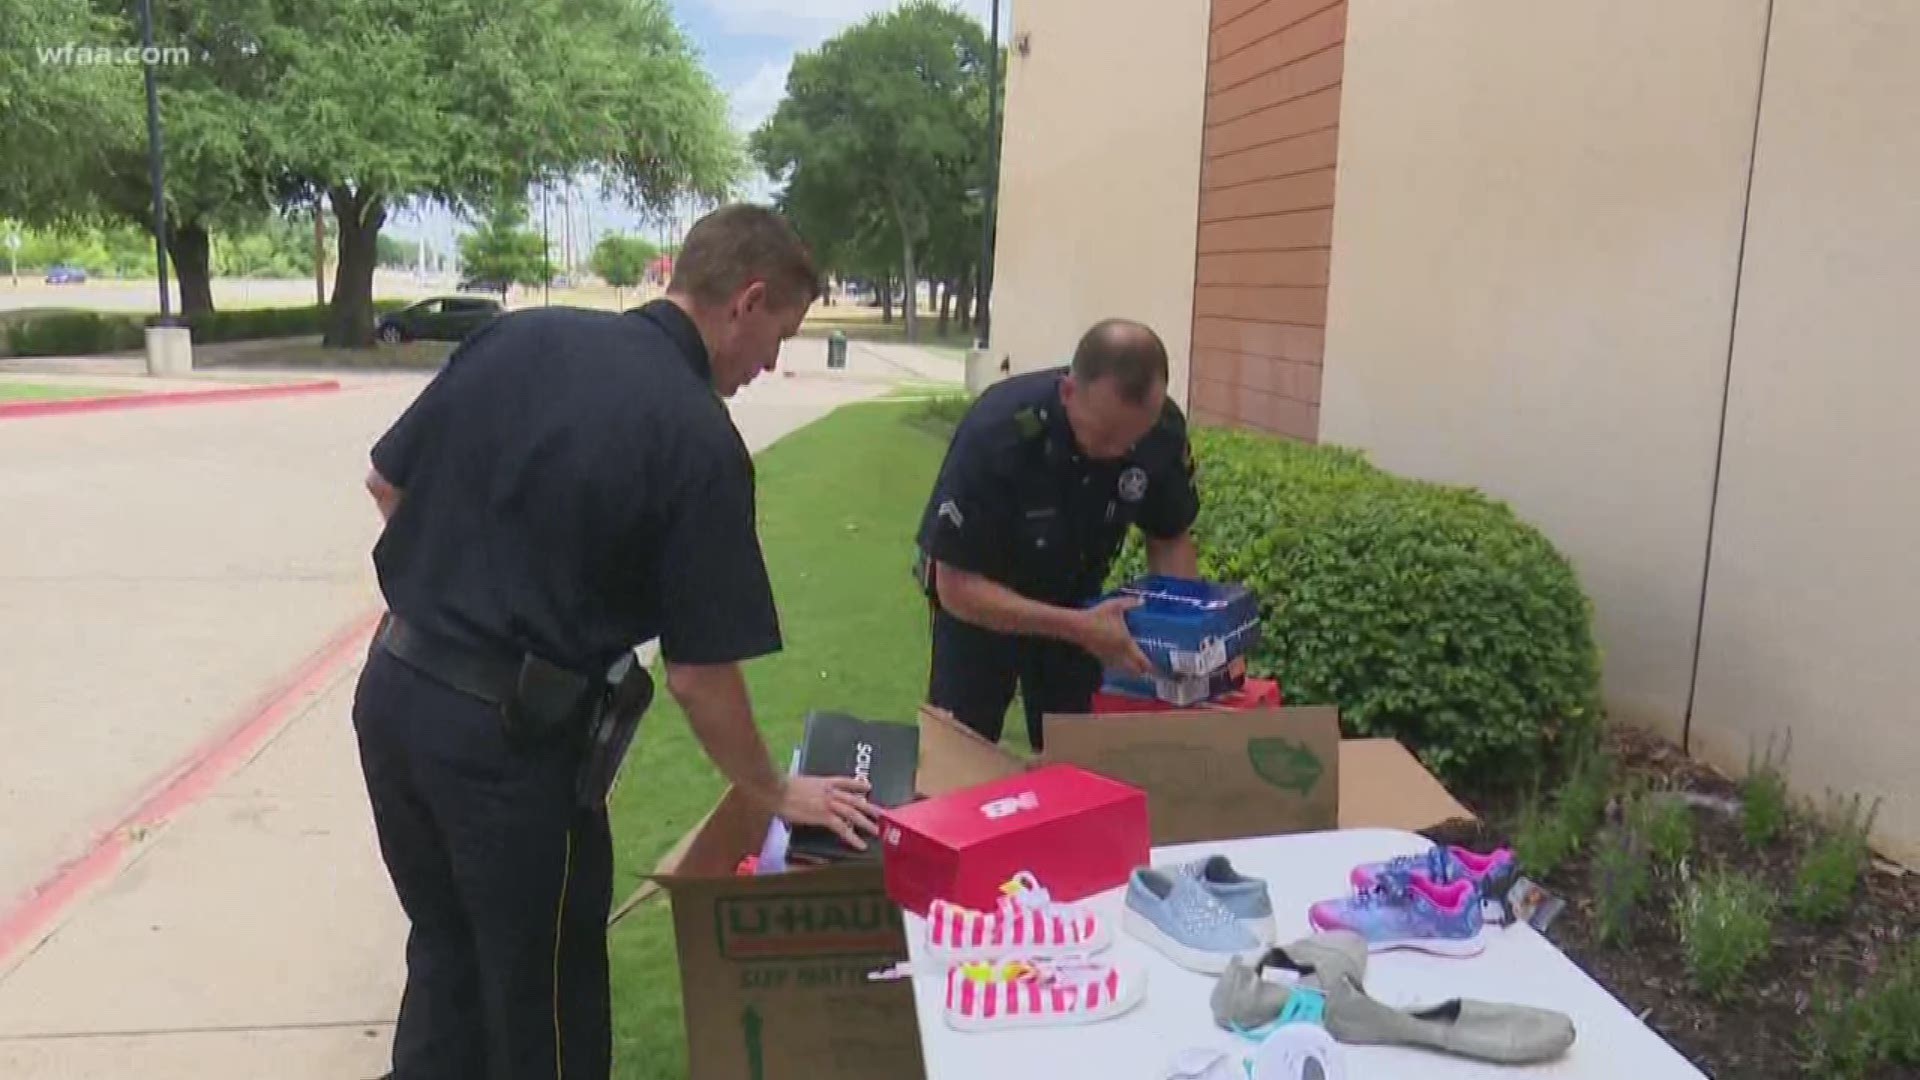 Officer donates hundreds of shoes to kids